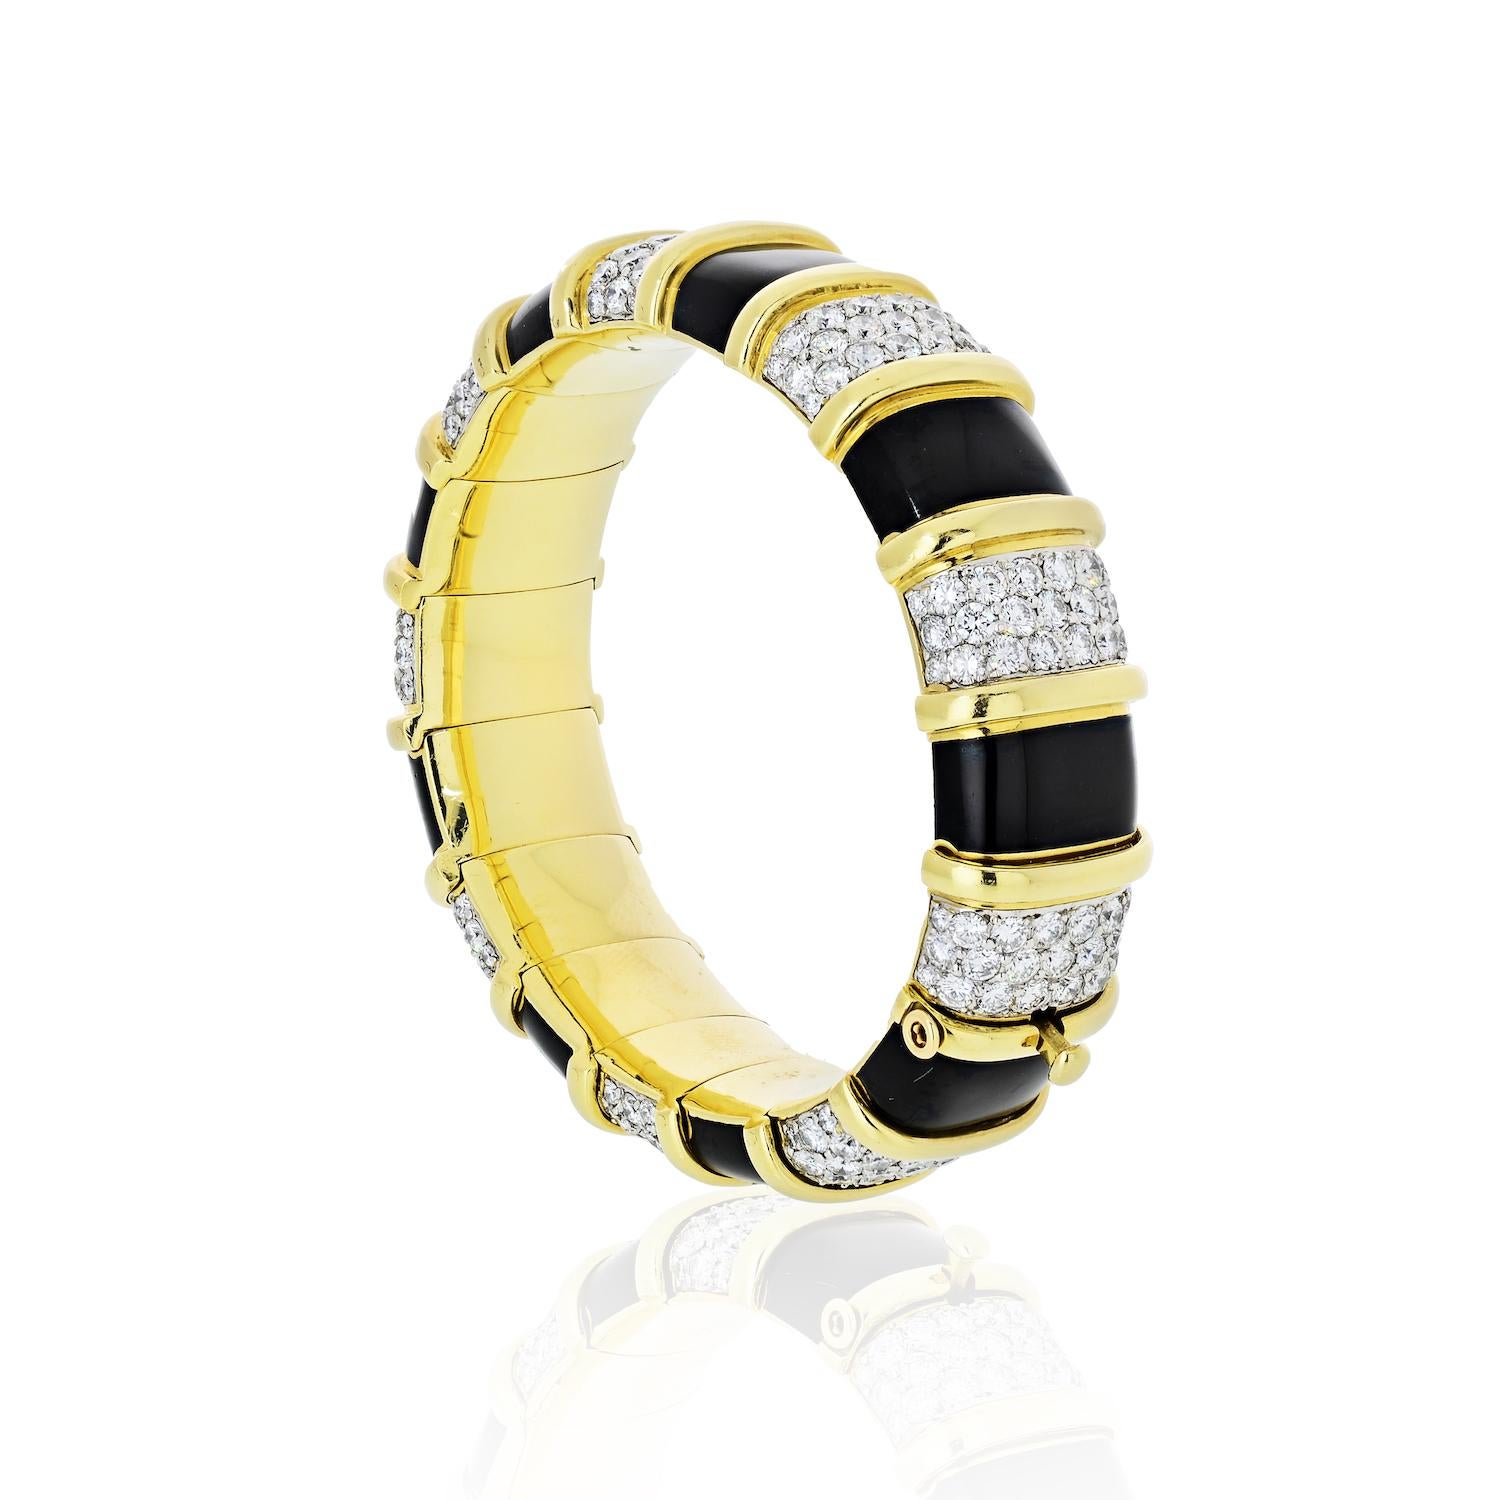 The Jean Schlumberger diamond bracelet features a juxtaposition of round brilliant white diamonds and black enamel framed in 18k gold and platinum. 

Jean Schlumberger, perhaps best known for his collaboration with famed jeweler Tiffany & Company,